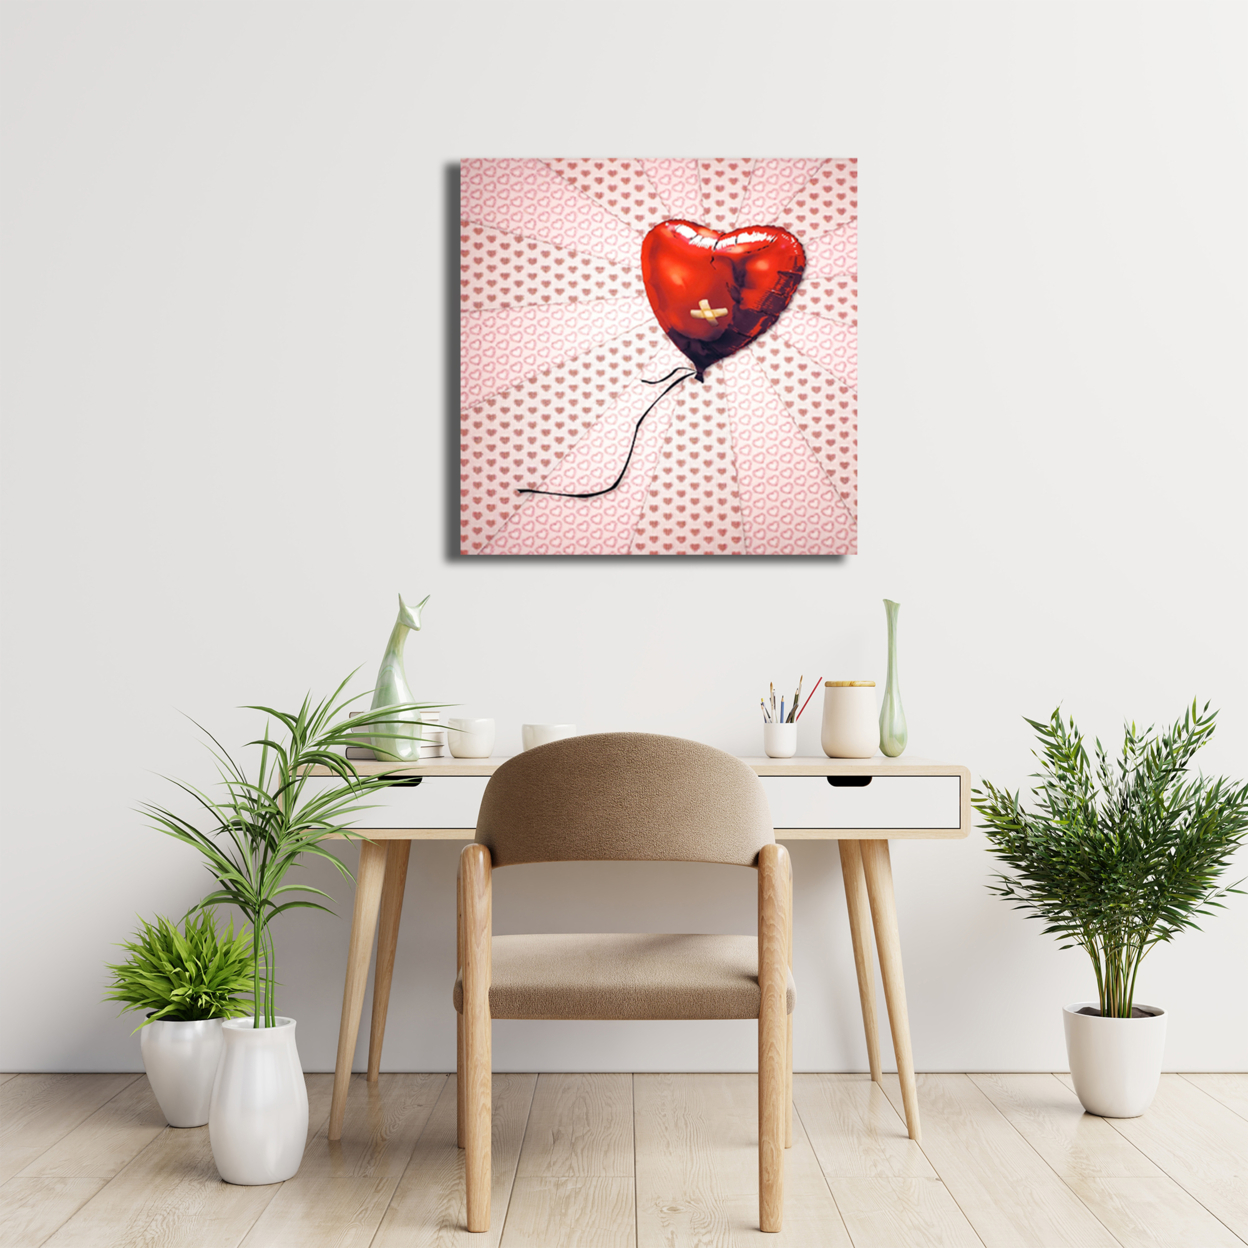 Matashi 5D Multi-Dimensional Wall Art - Custom Made Balloon Heart Wall Art Print On Strong Polycarbonate Panel W/ Vibrant Colors (16x16 In)